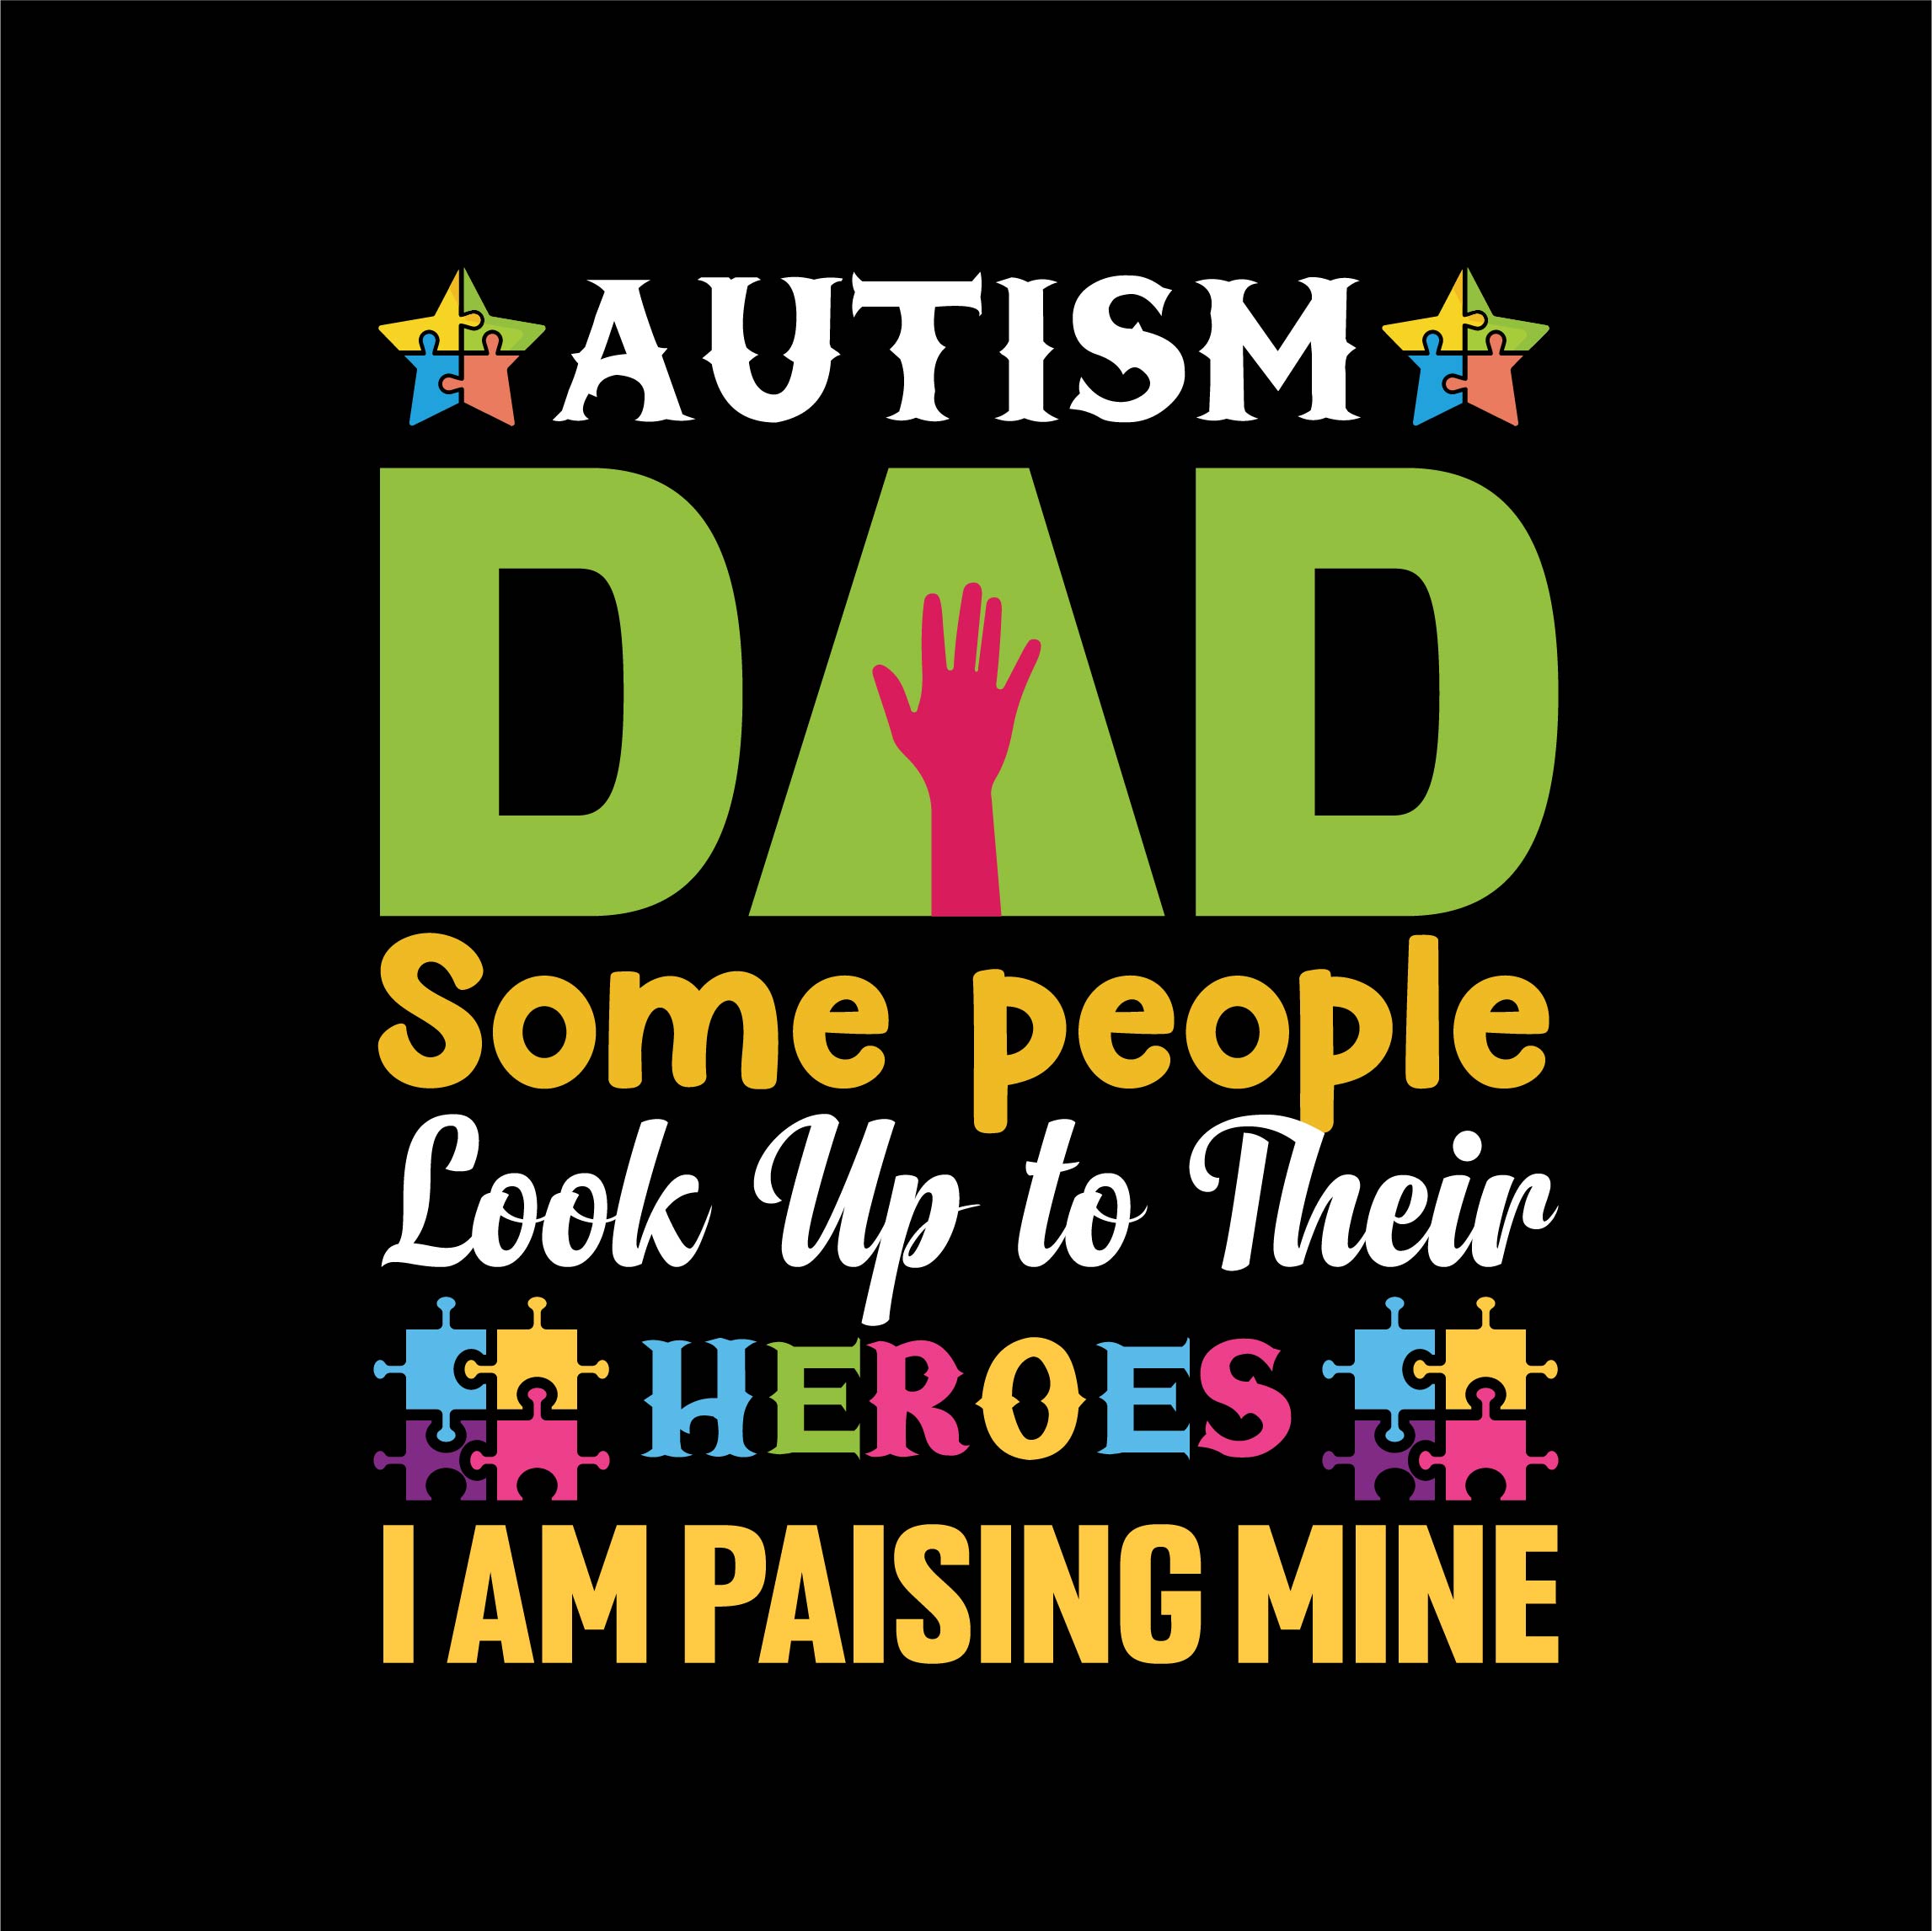 Autism dad Some people look up their heroes, I am paising mine Autism t-shirt design template cover image.